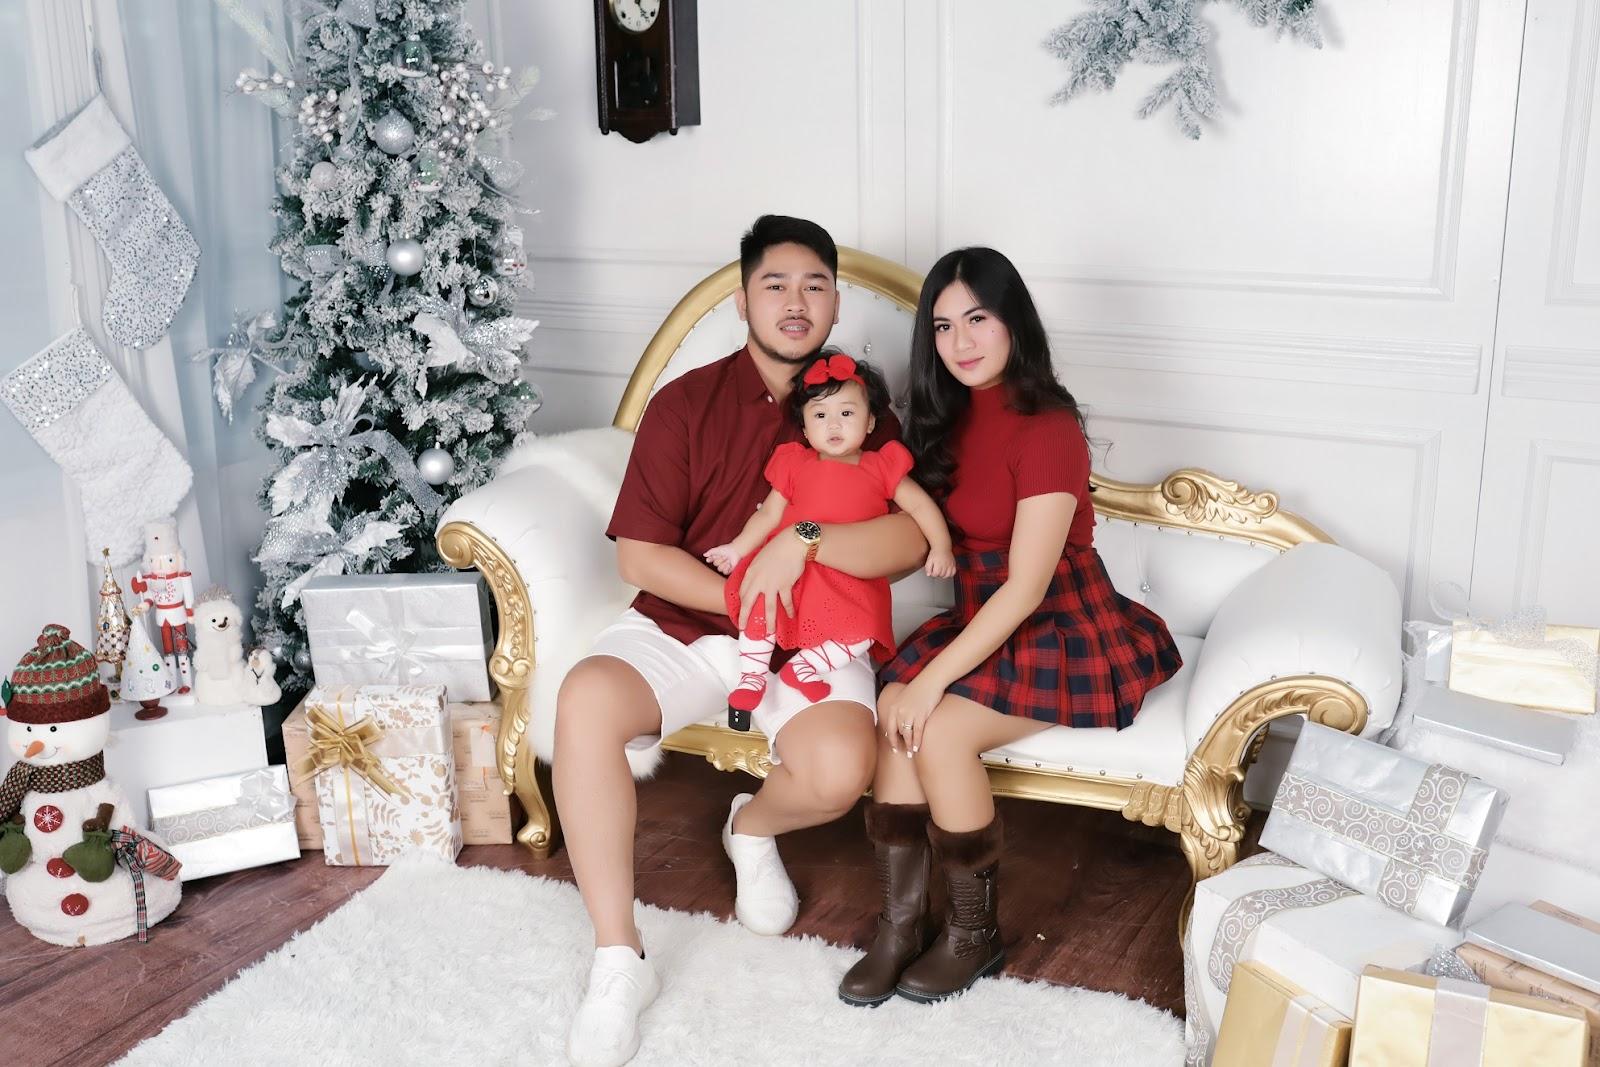 Family Christmas Photo Outfit Ideas tip: matching color is the key